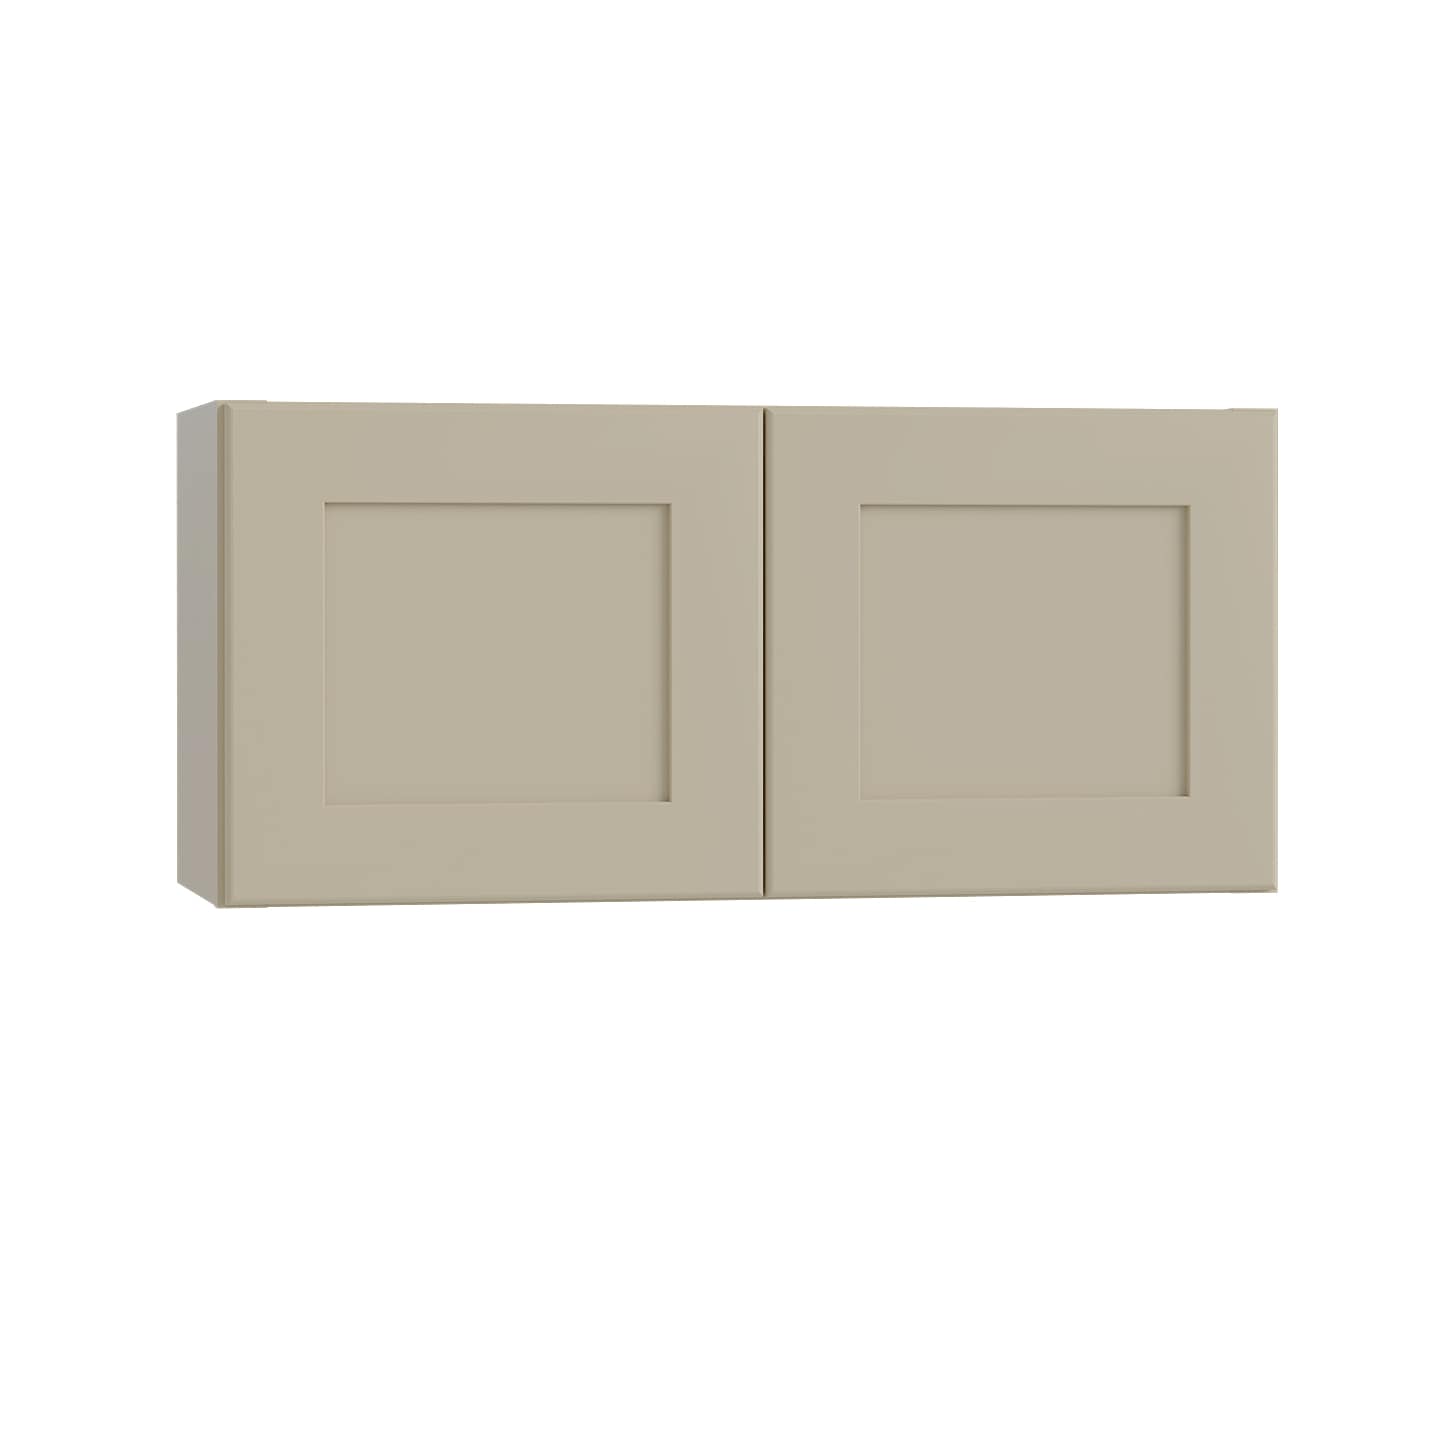 Luxxe Cabinetry 33-in W x 15-in H x 12-in D Norfolk Blended Cream Painted Door Wall Fully Assembled Semi-custom Cabinet in Off-White | W3315-NBC